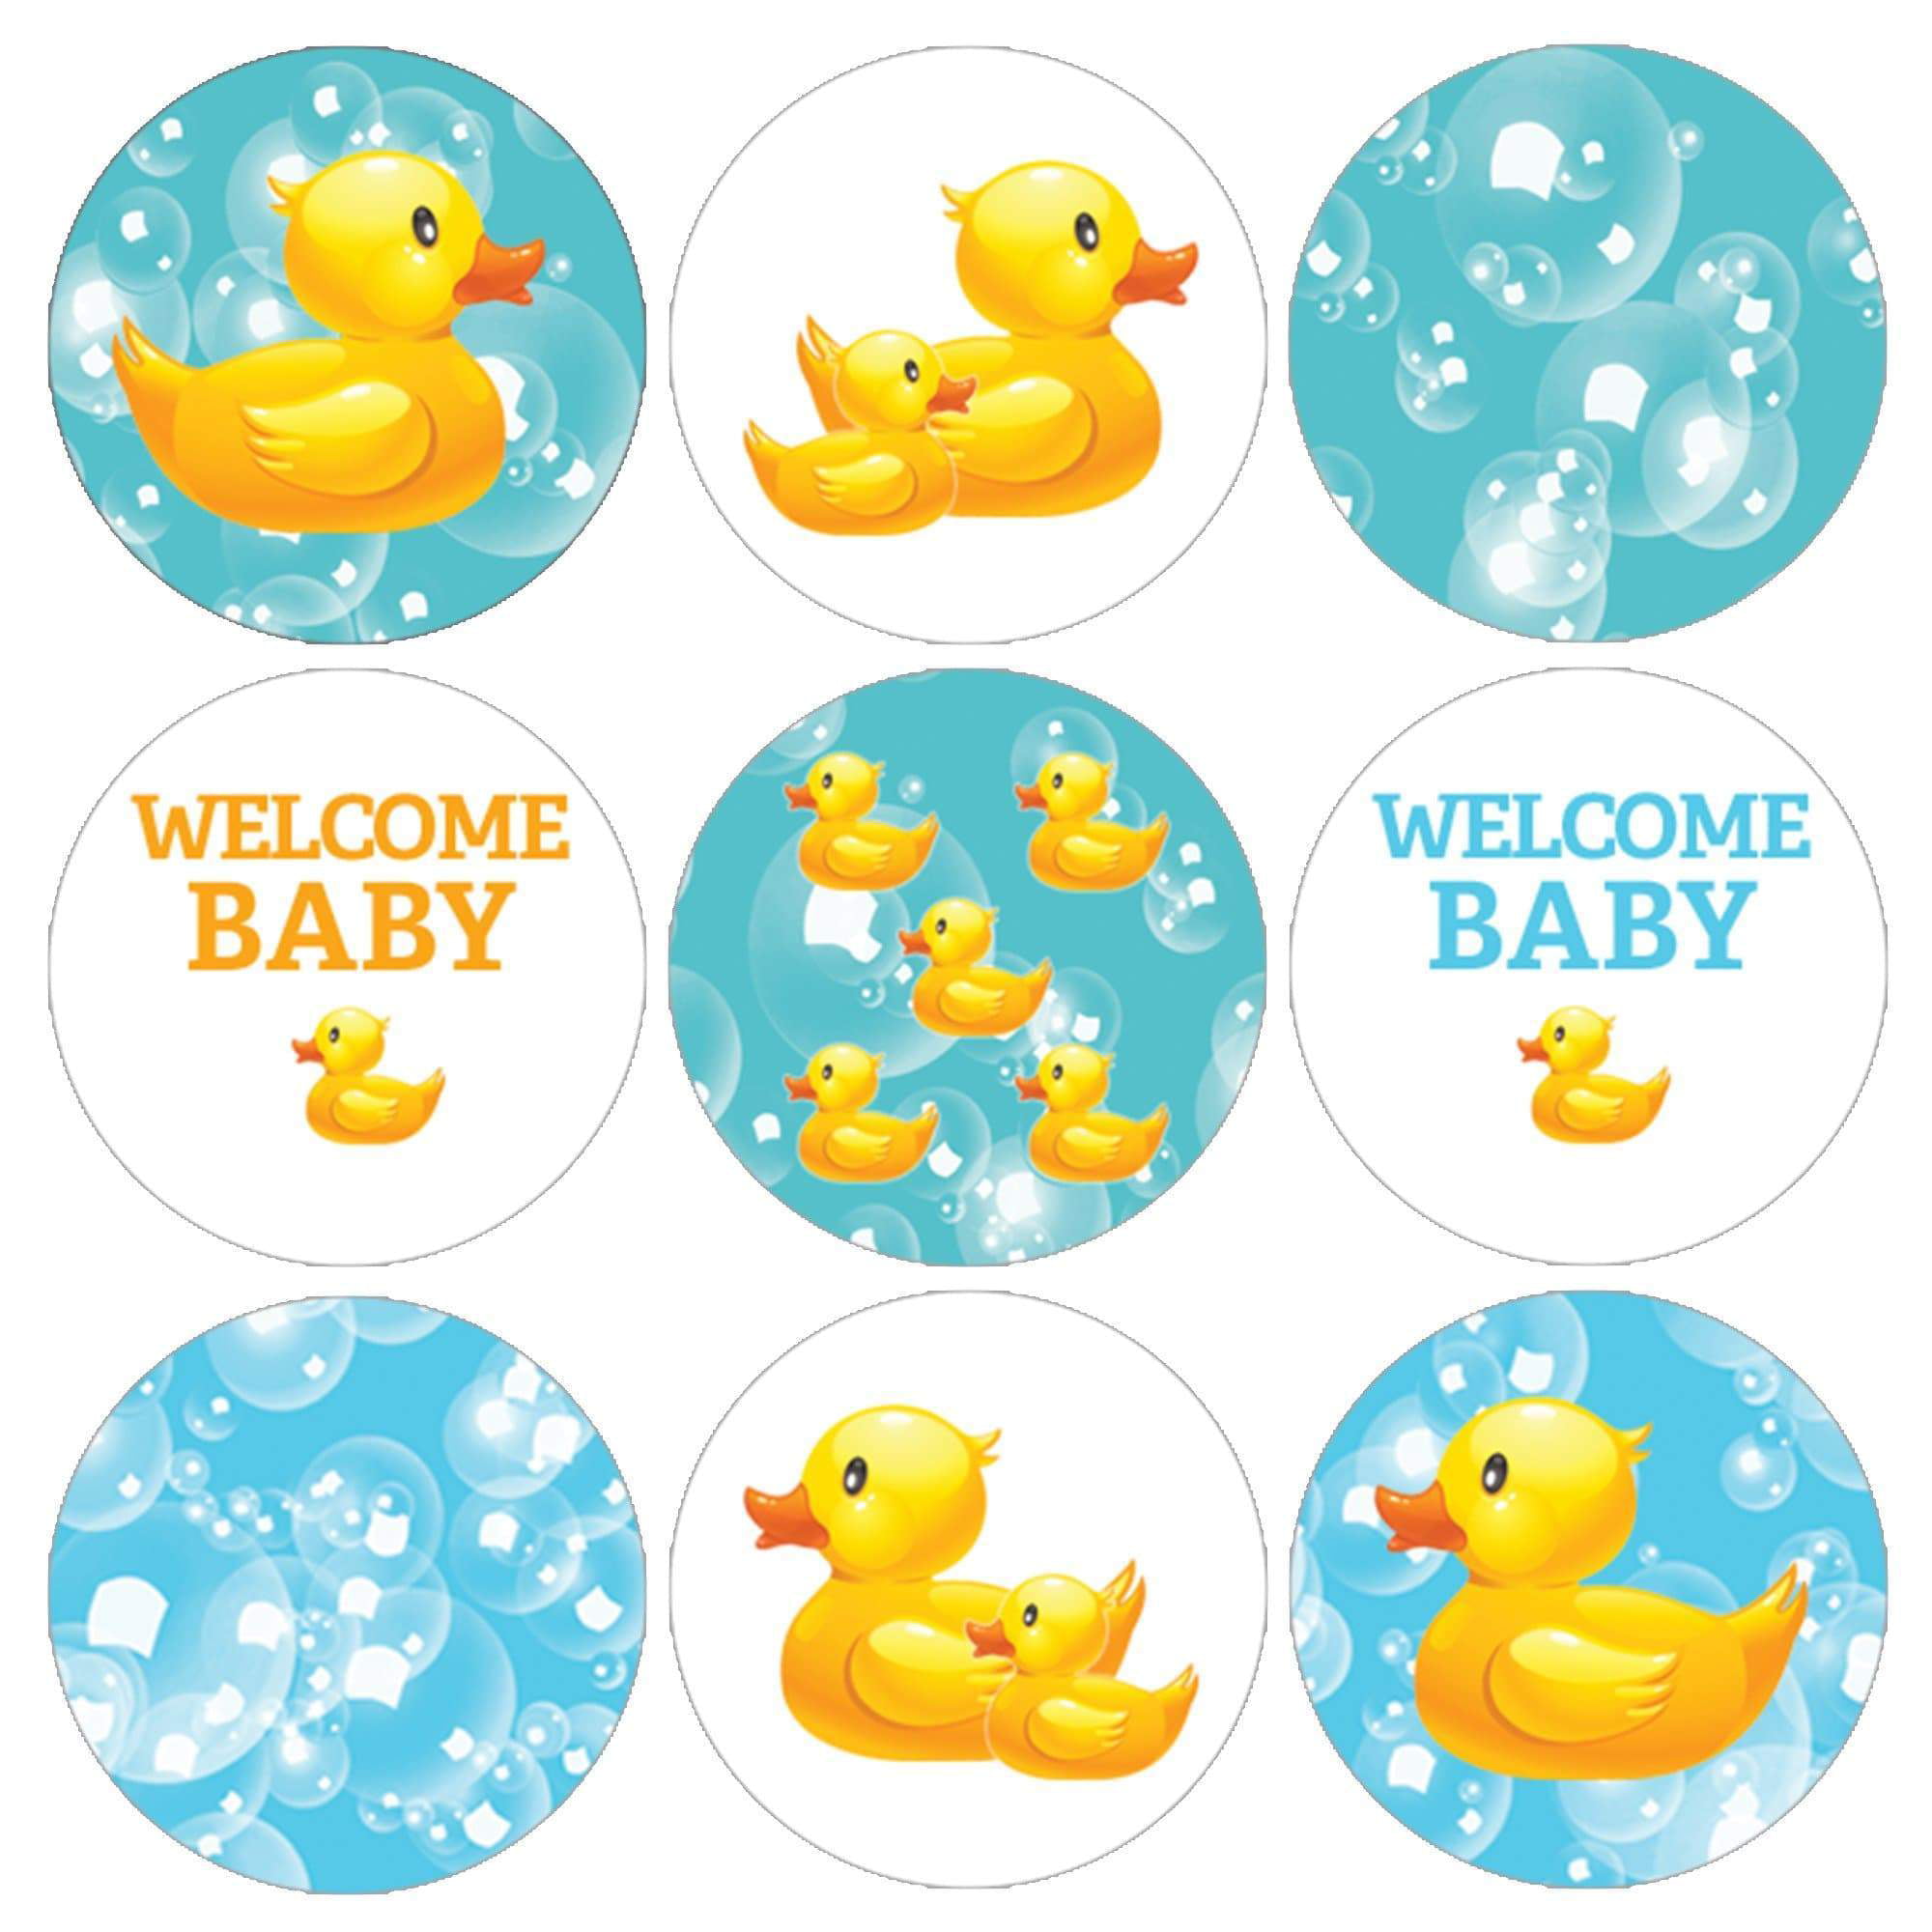 Yellow Rubber Duck Thank You for Coming Sticker Labels Set of 30 Children Birthday Baby Shower